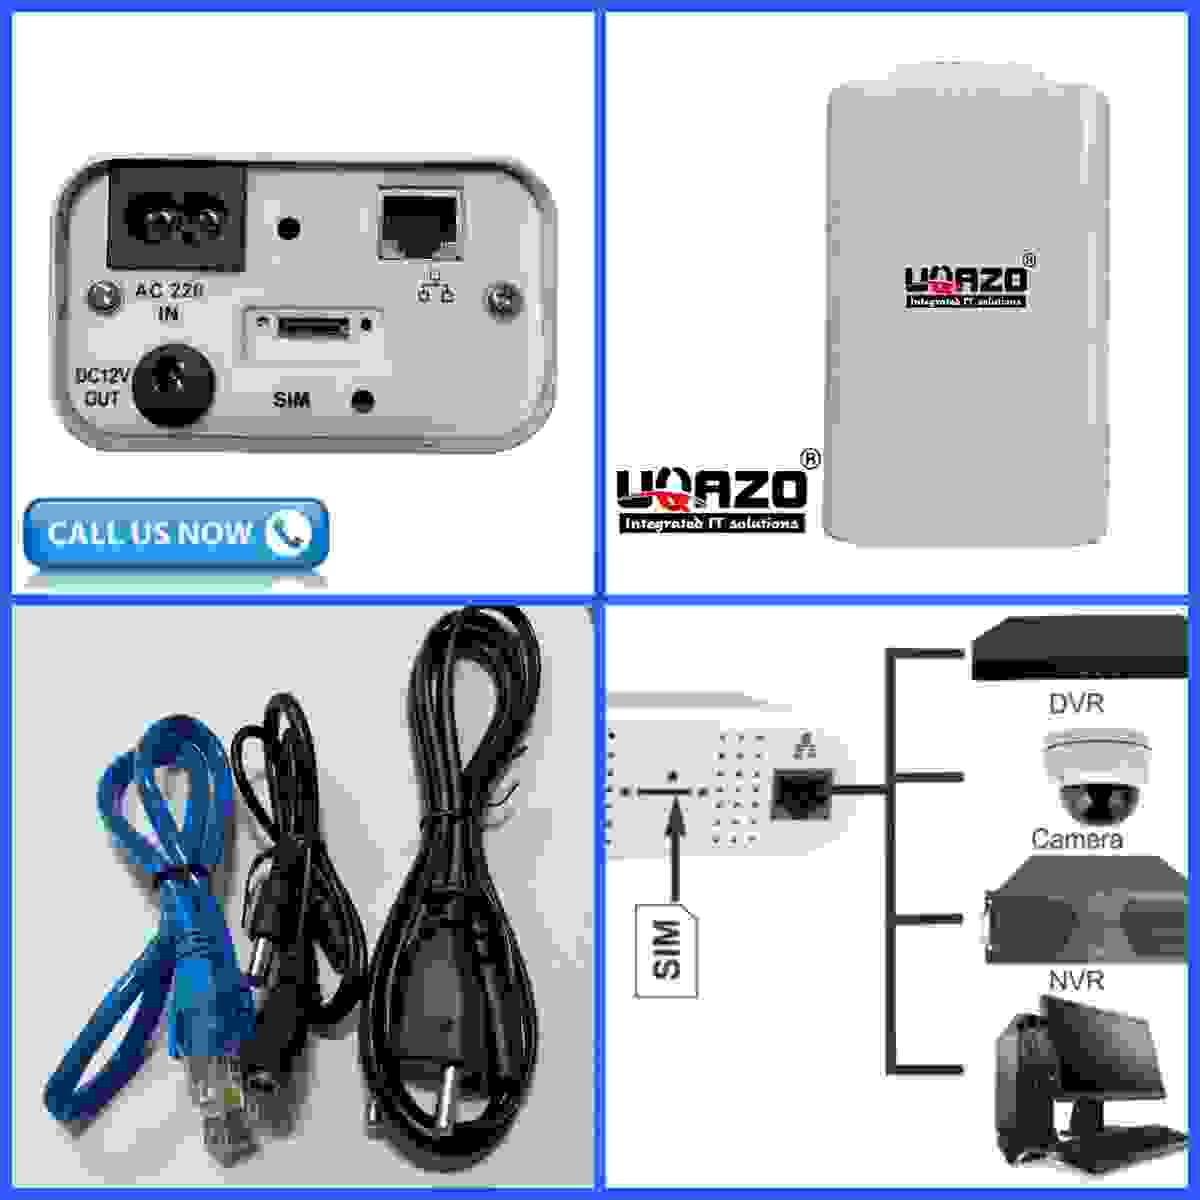 UQAZO 4G ROUTER+WIFI+LAN+WITH POWER+ WATERPROOF All GSM Sim Supported Special for CCTV Modem